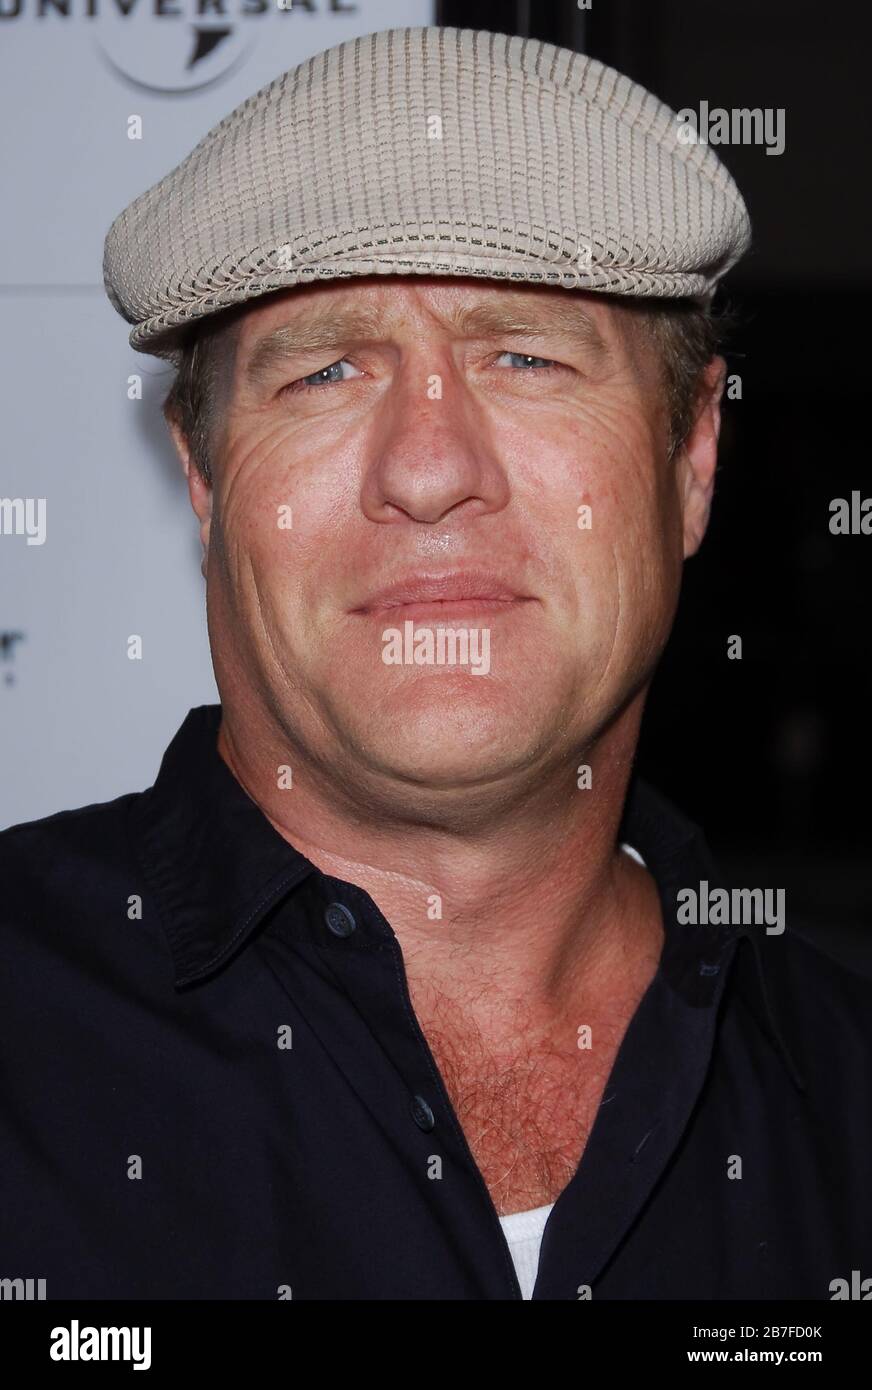 Gregg Henry at the Los Angeles Premiere of 'The Black Dahlia' held at the Samuel Goldwyn Theater at the Academy of Motion Picture Arts and Sciences in Beverly Hills, CA. The event took place on Wednesday, September 6, 2006.  Photo by: SBM / PictureLux Stock Photo